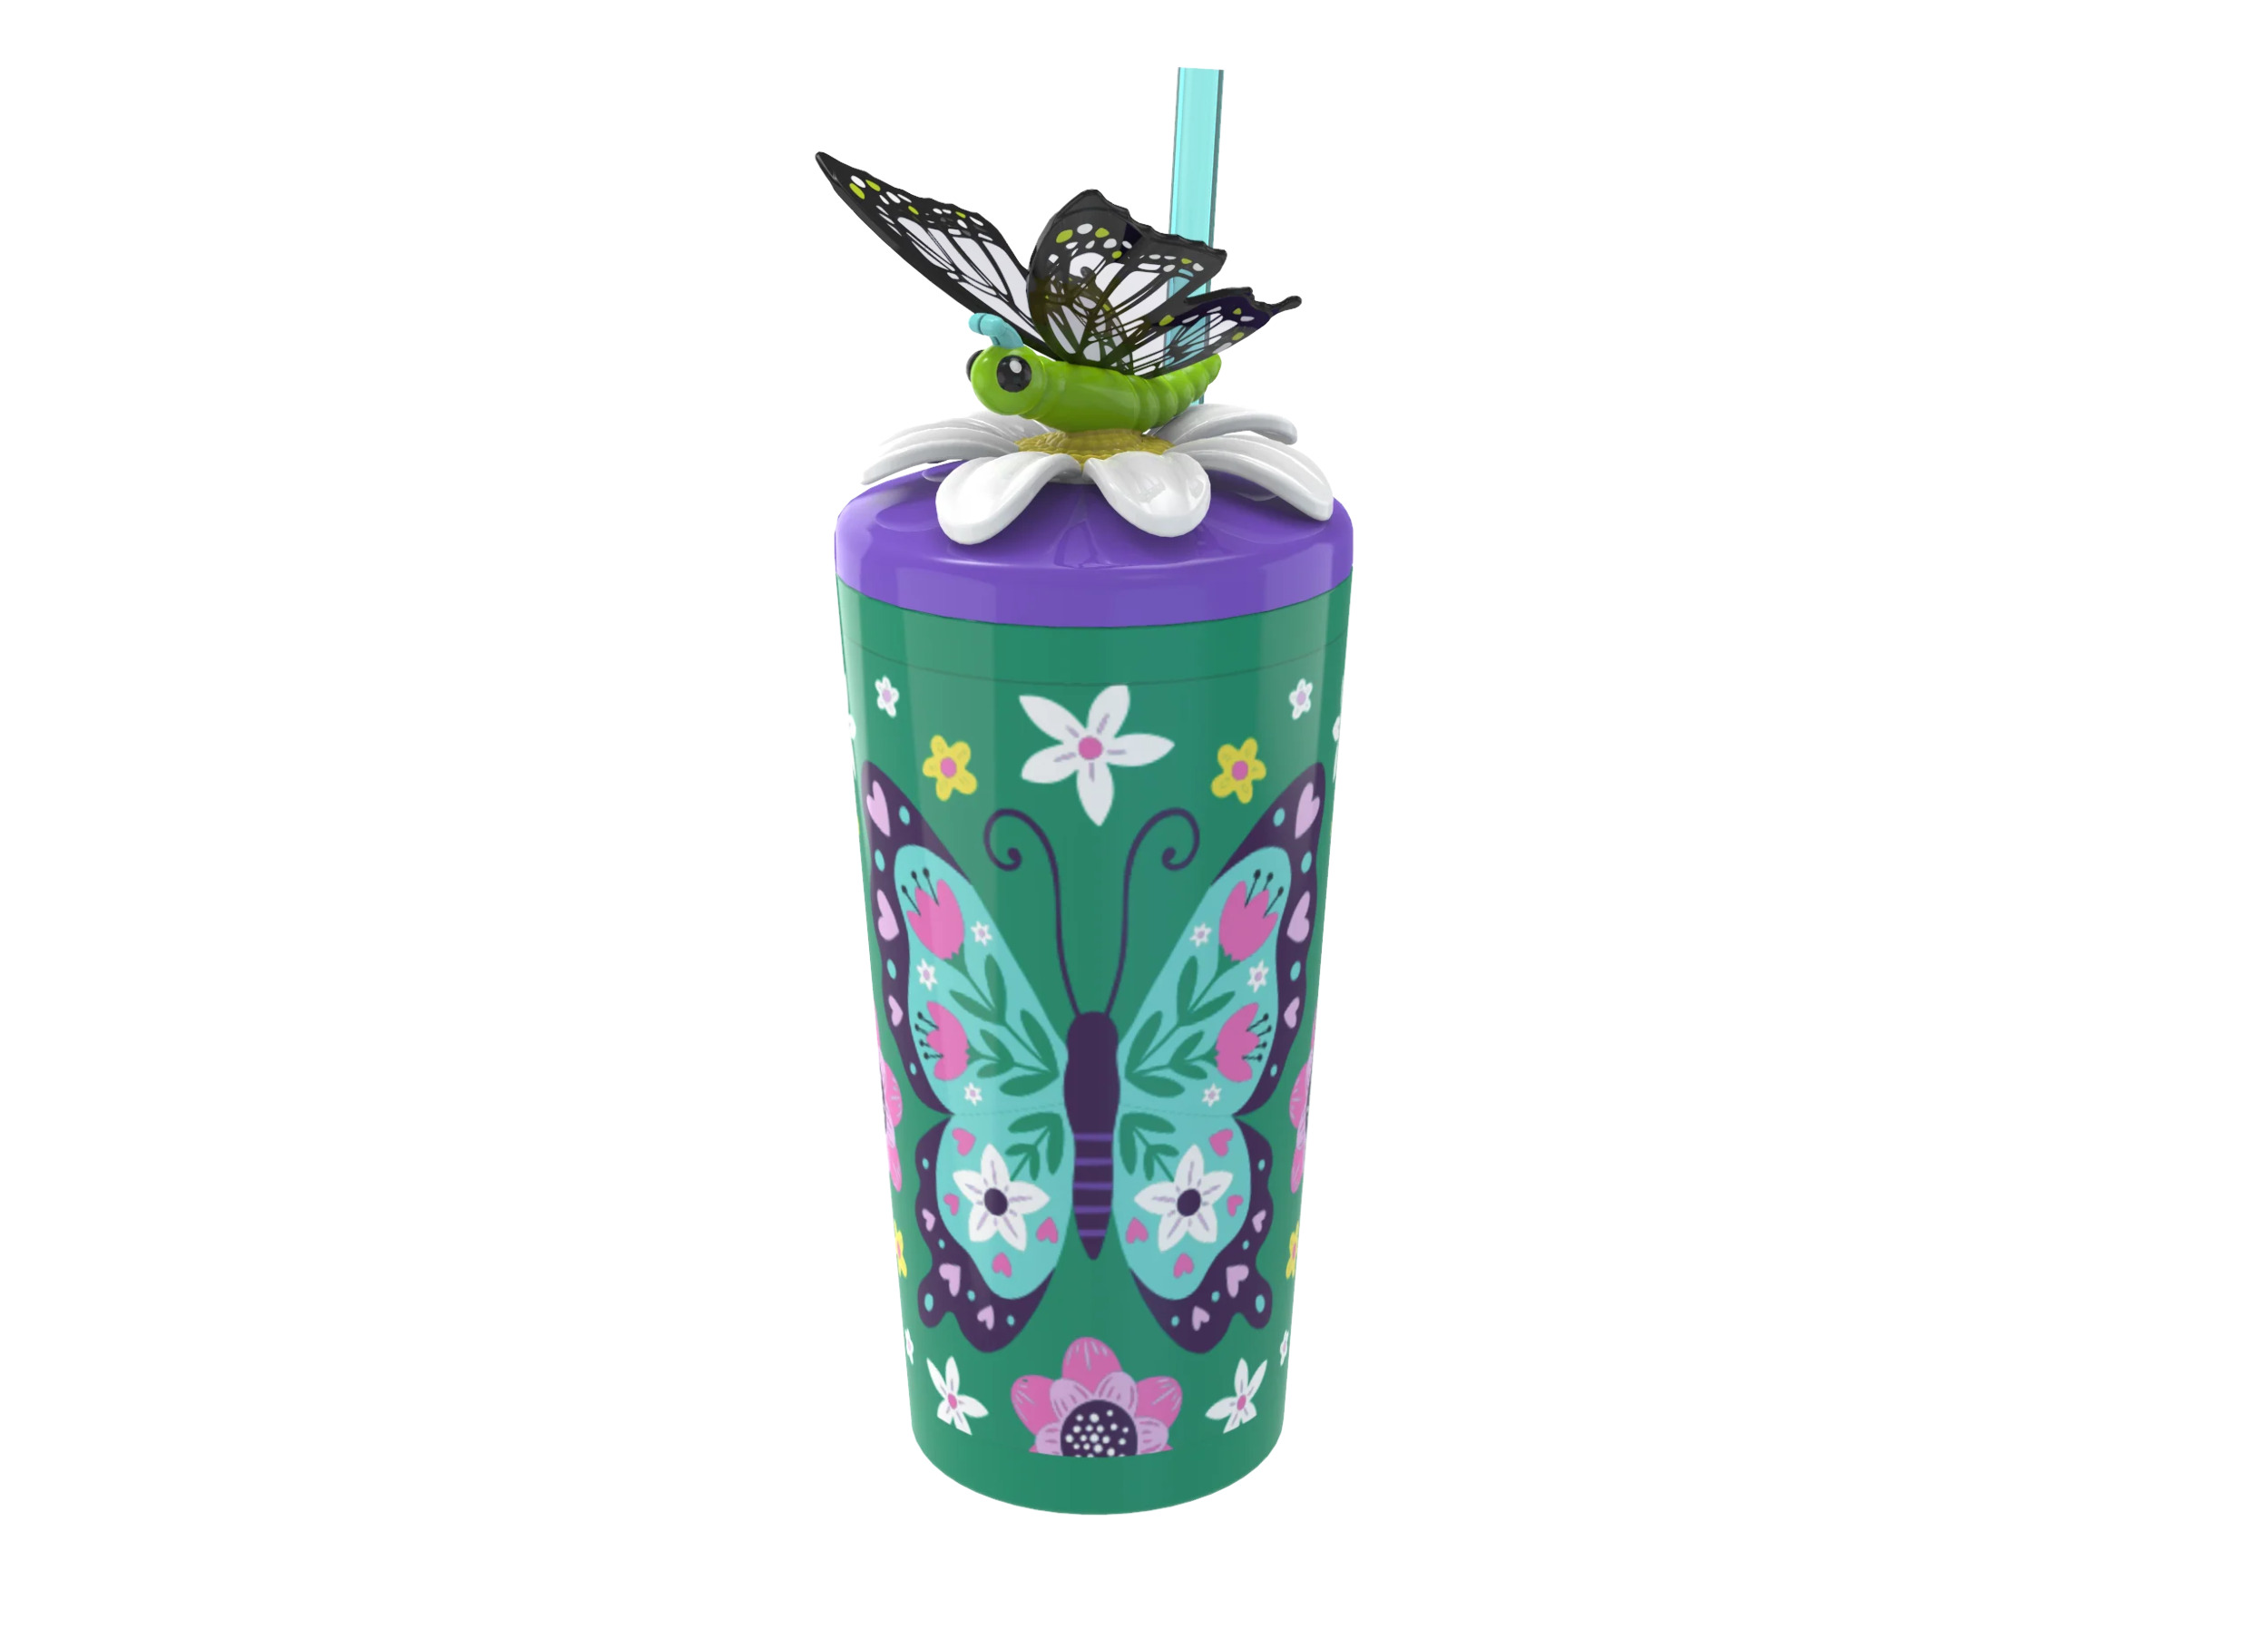 Cool Gear 4-Pack 18 oz Fun Toppers Butterfly Character Lid Tumblers with straw included | Durable, Reusable Water Bottle Gift for Kids, Adults - image 4 of 5